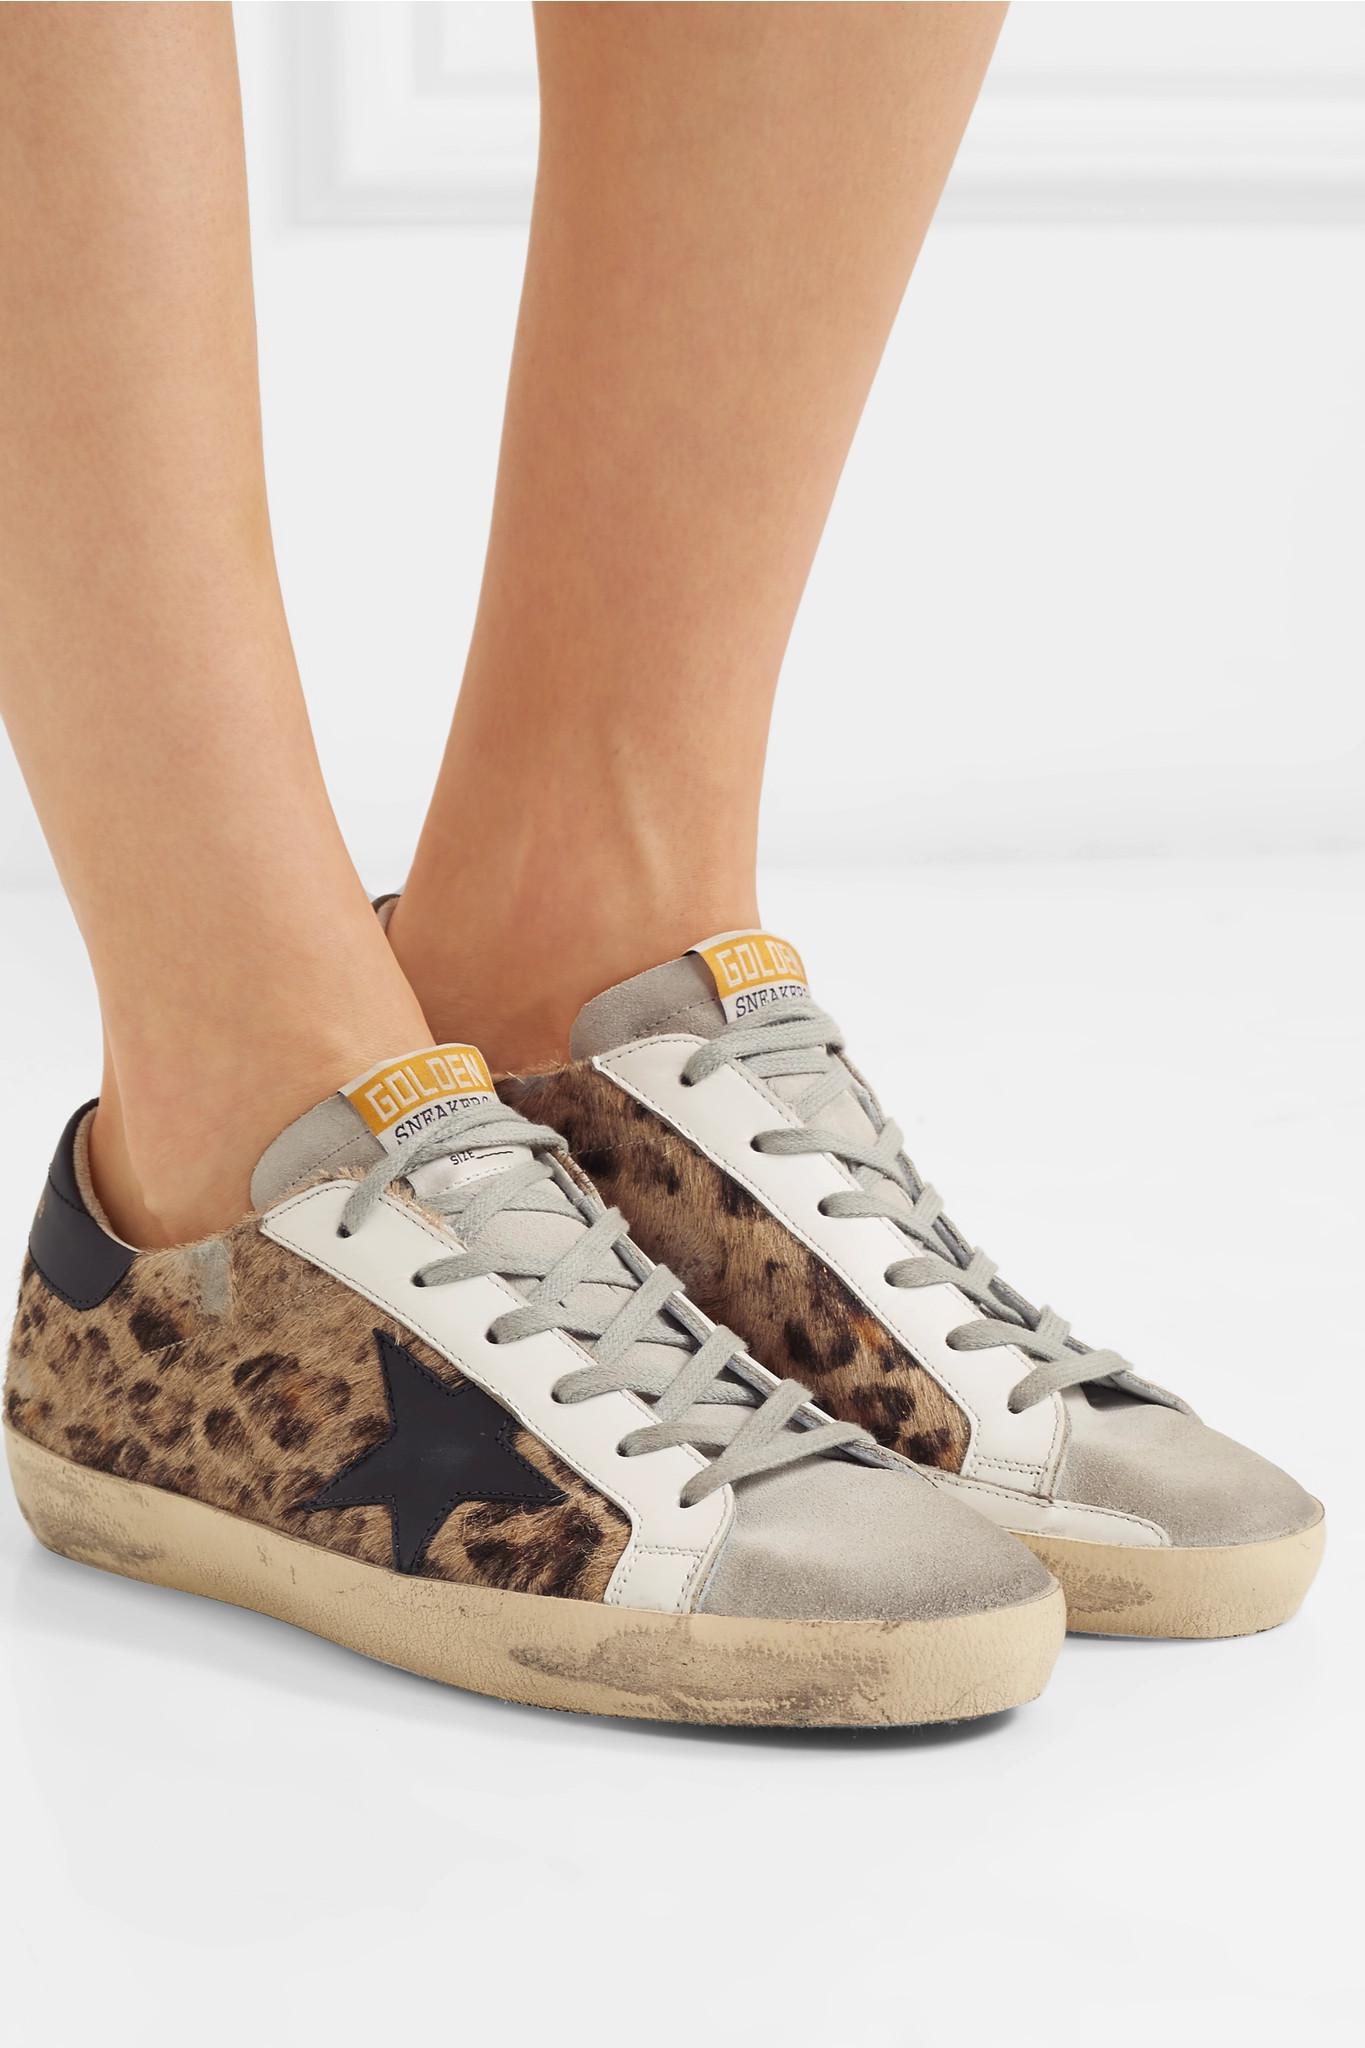 Golden Goose Deluxe Brand Superstar Distressed Leopard-print Calf Hair, Leather And Suede 